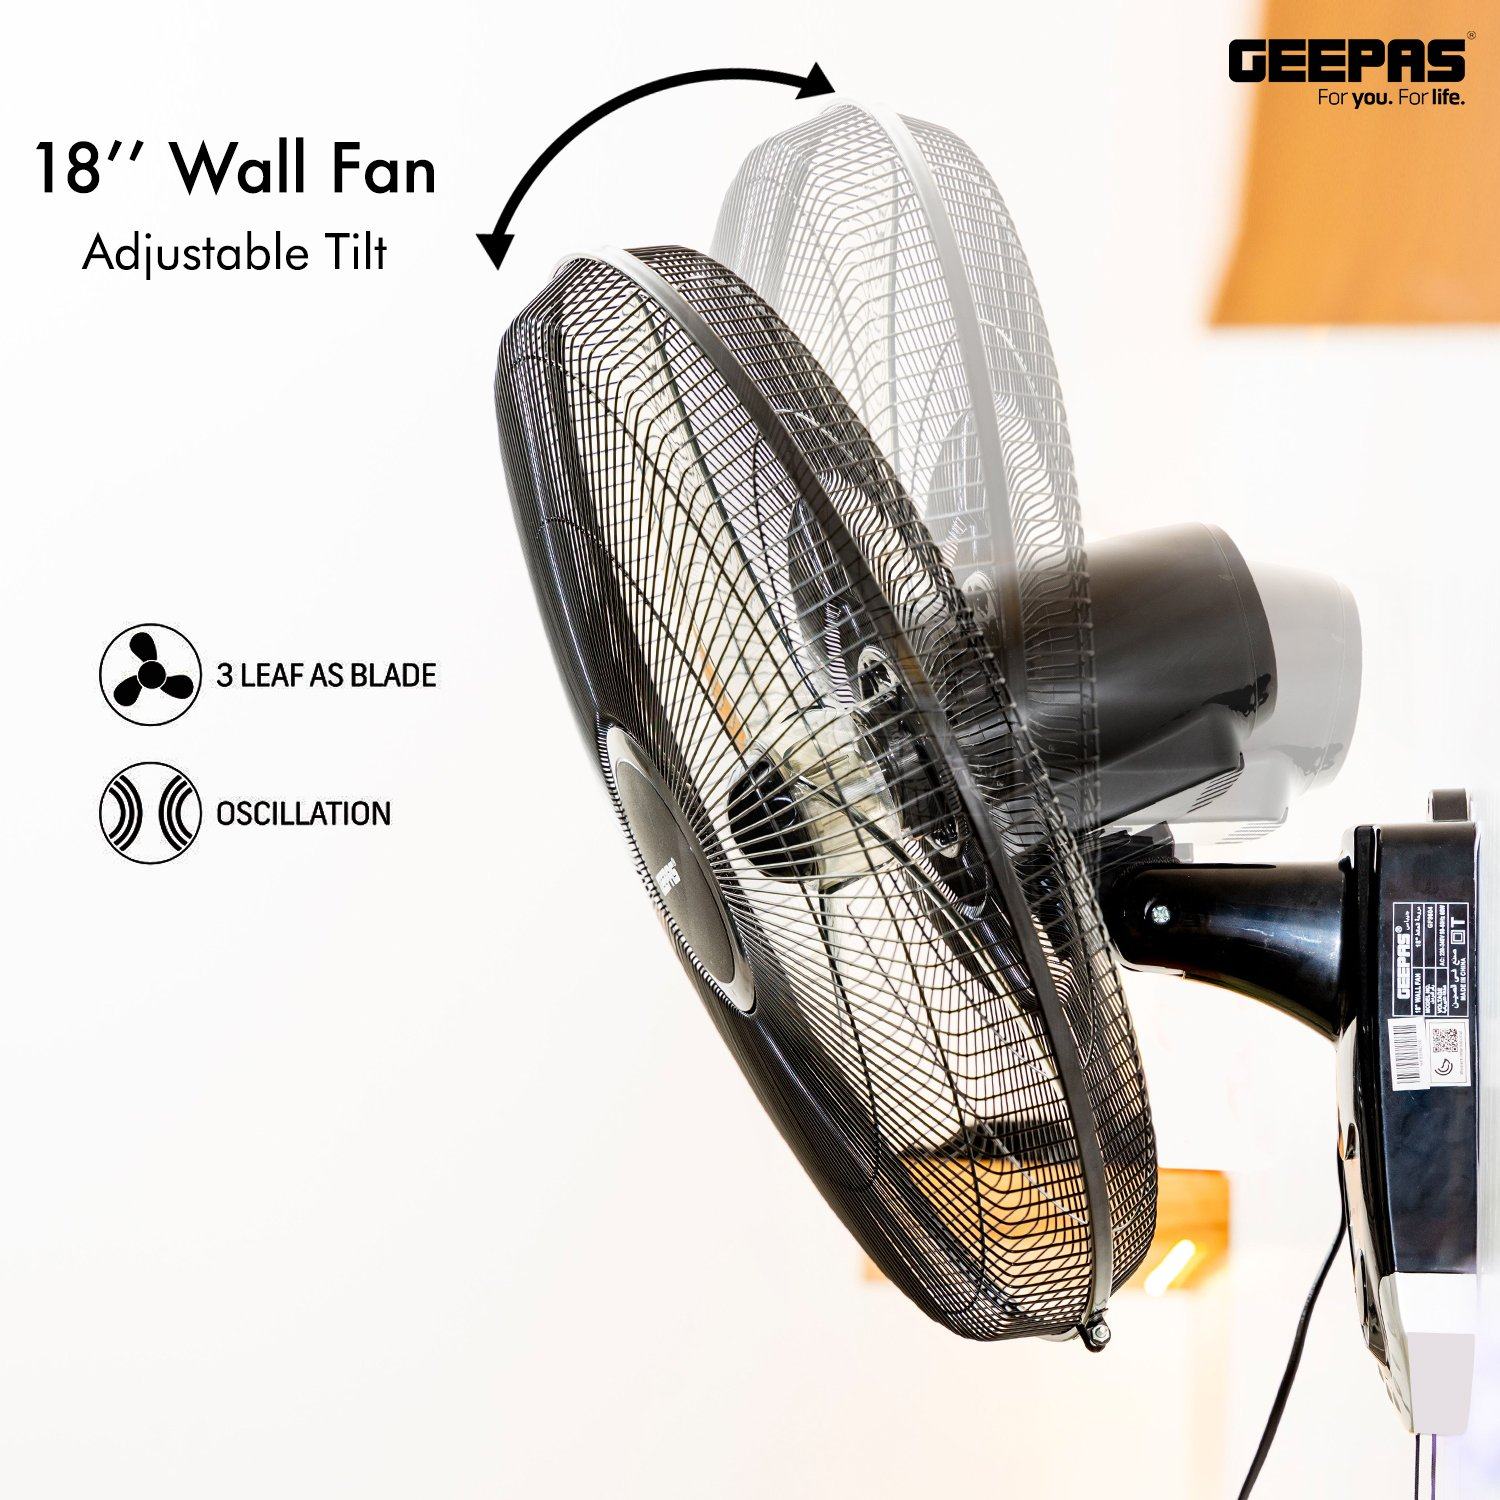 18-Inch Wall Mounted Fan Fan Geepas | For you. For life. 